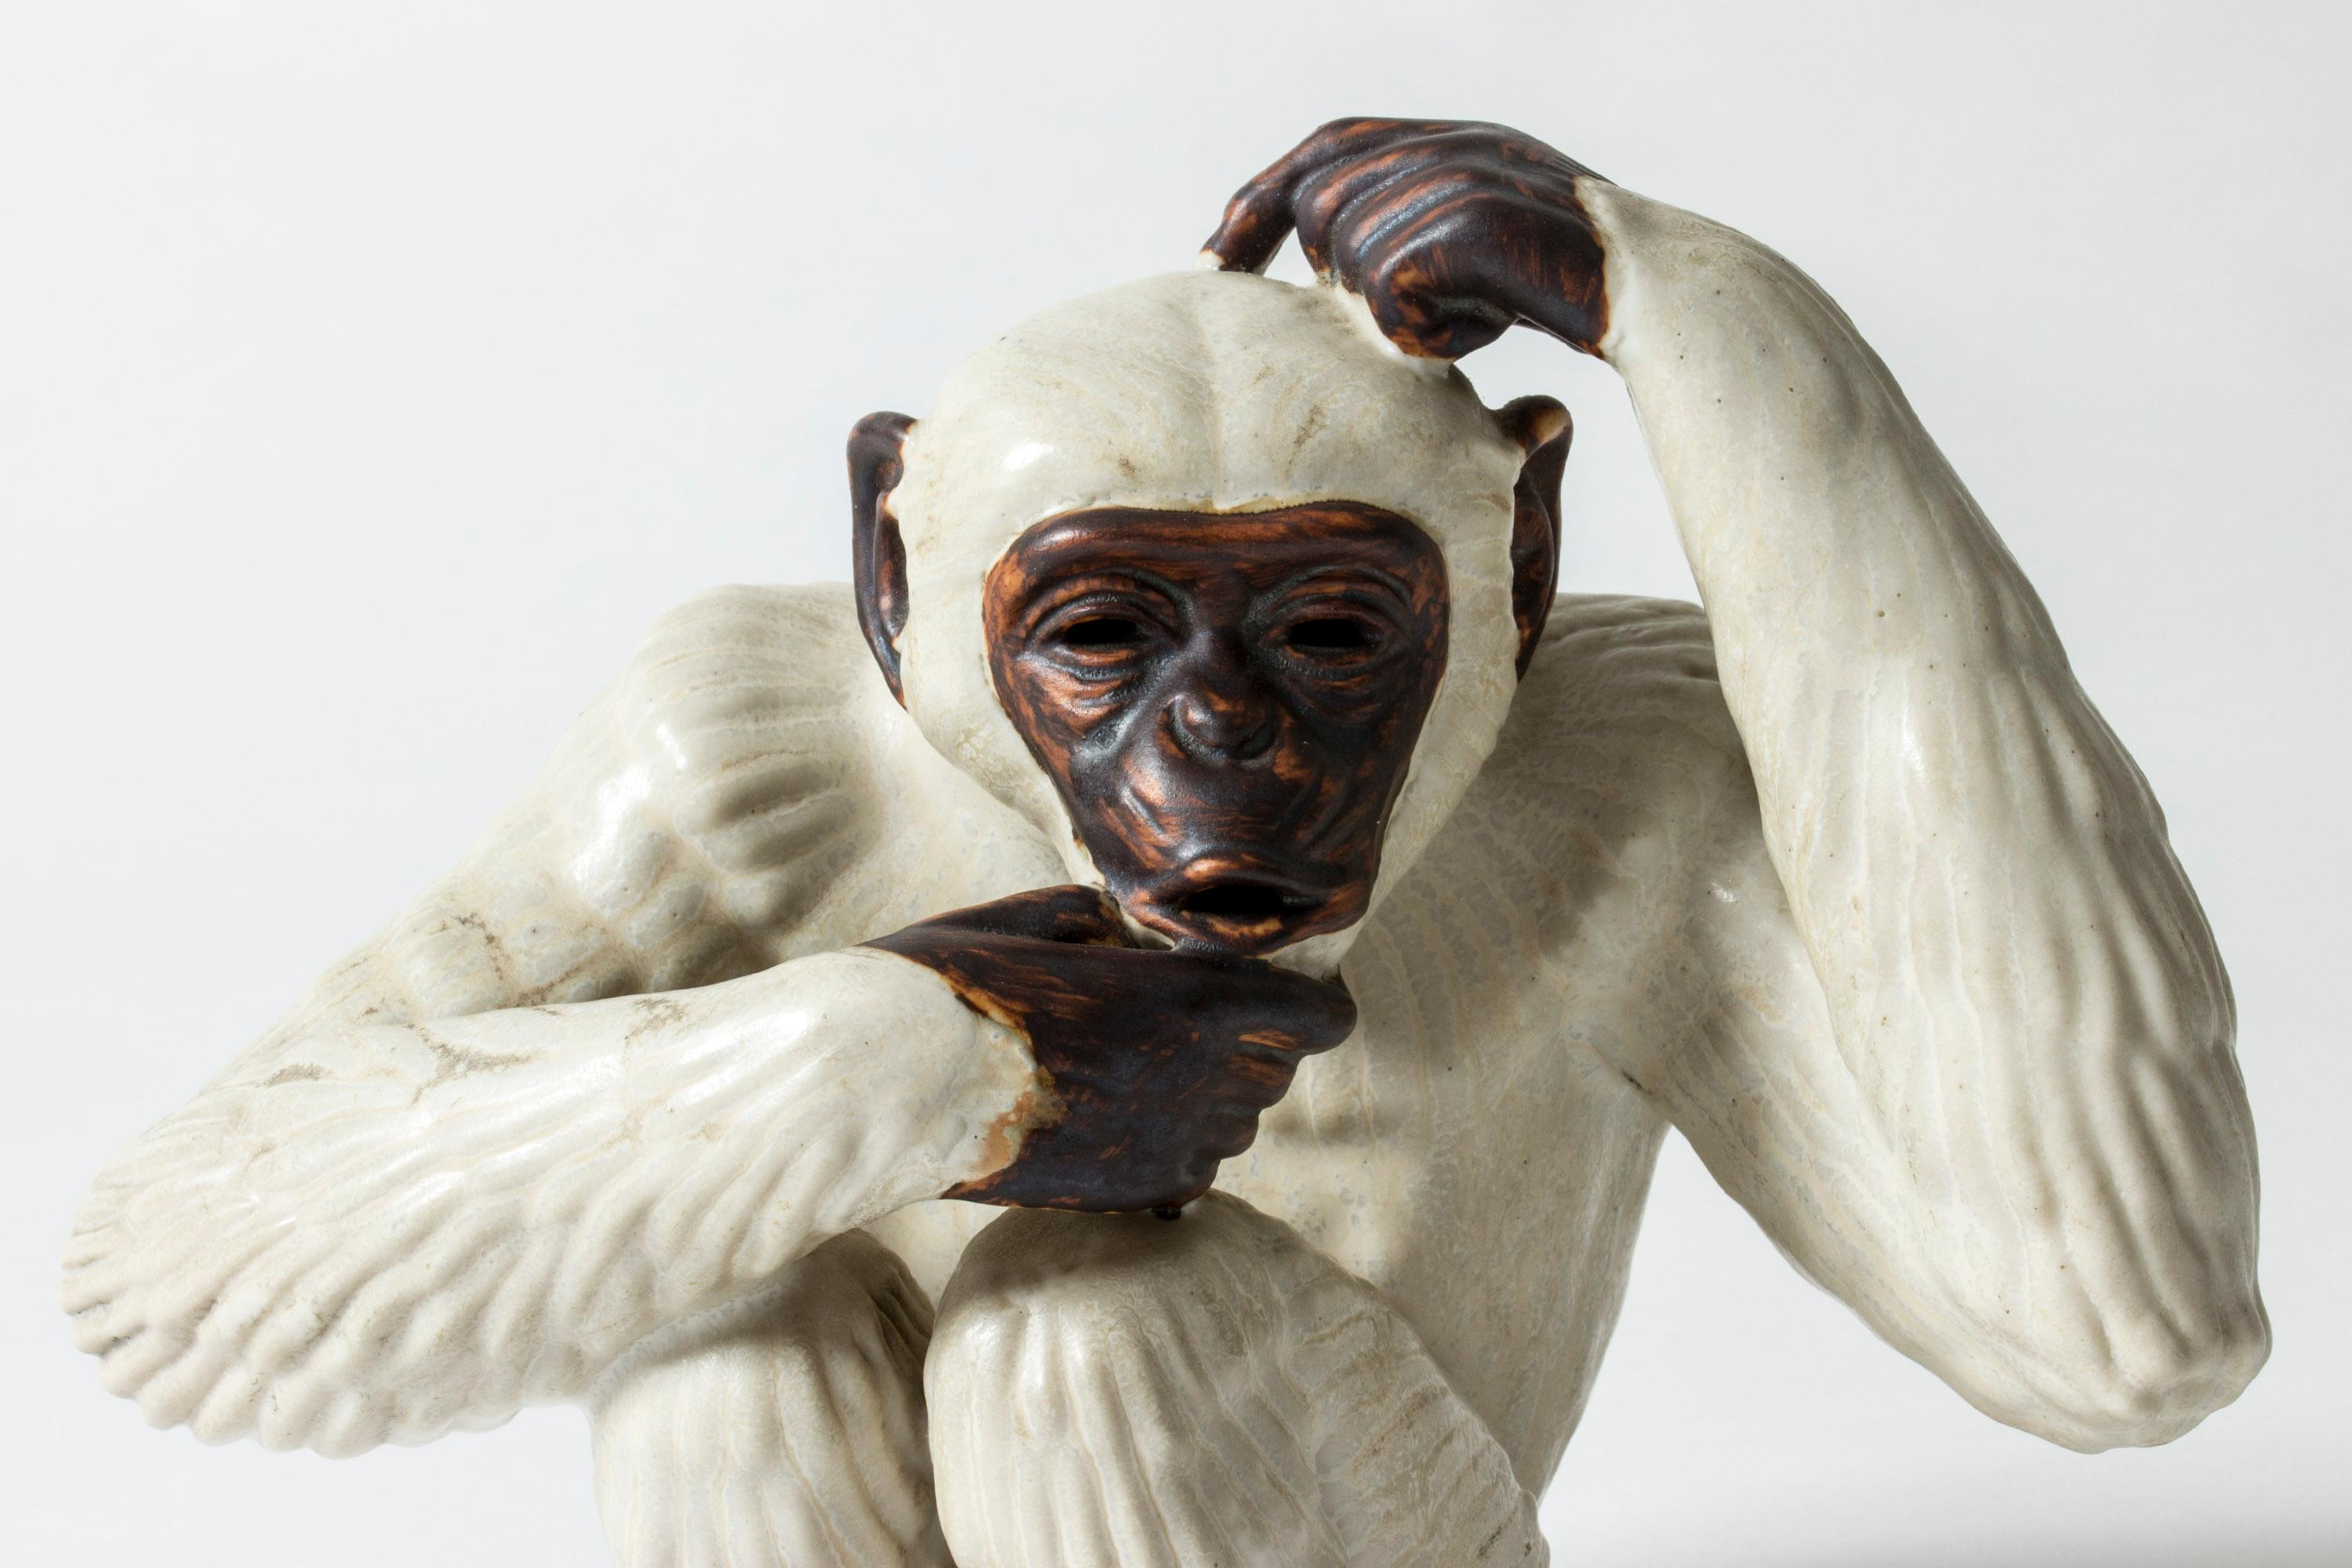 Adorable stoneware monkey figurine by Gunnar Nylund, glazed white and dark brown. Beautifully sculpted, with a spirited expression. Gunnar Nylund’s animal figurines are among his most loved creations, combining naturalistic and modernist elements